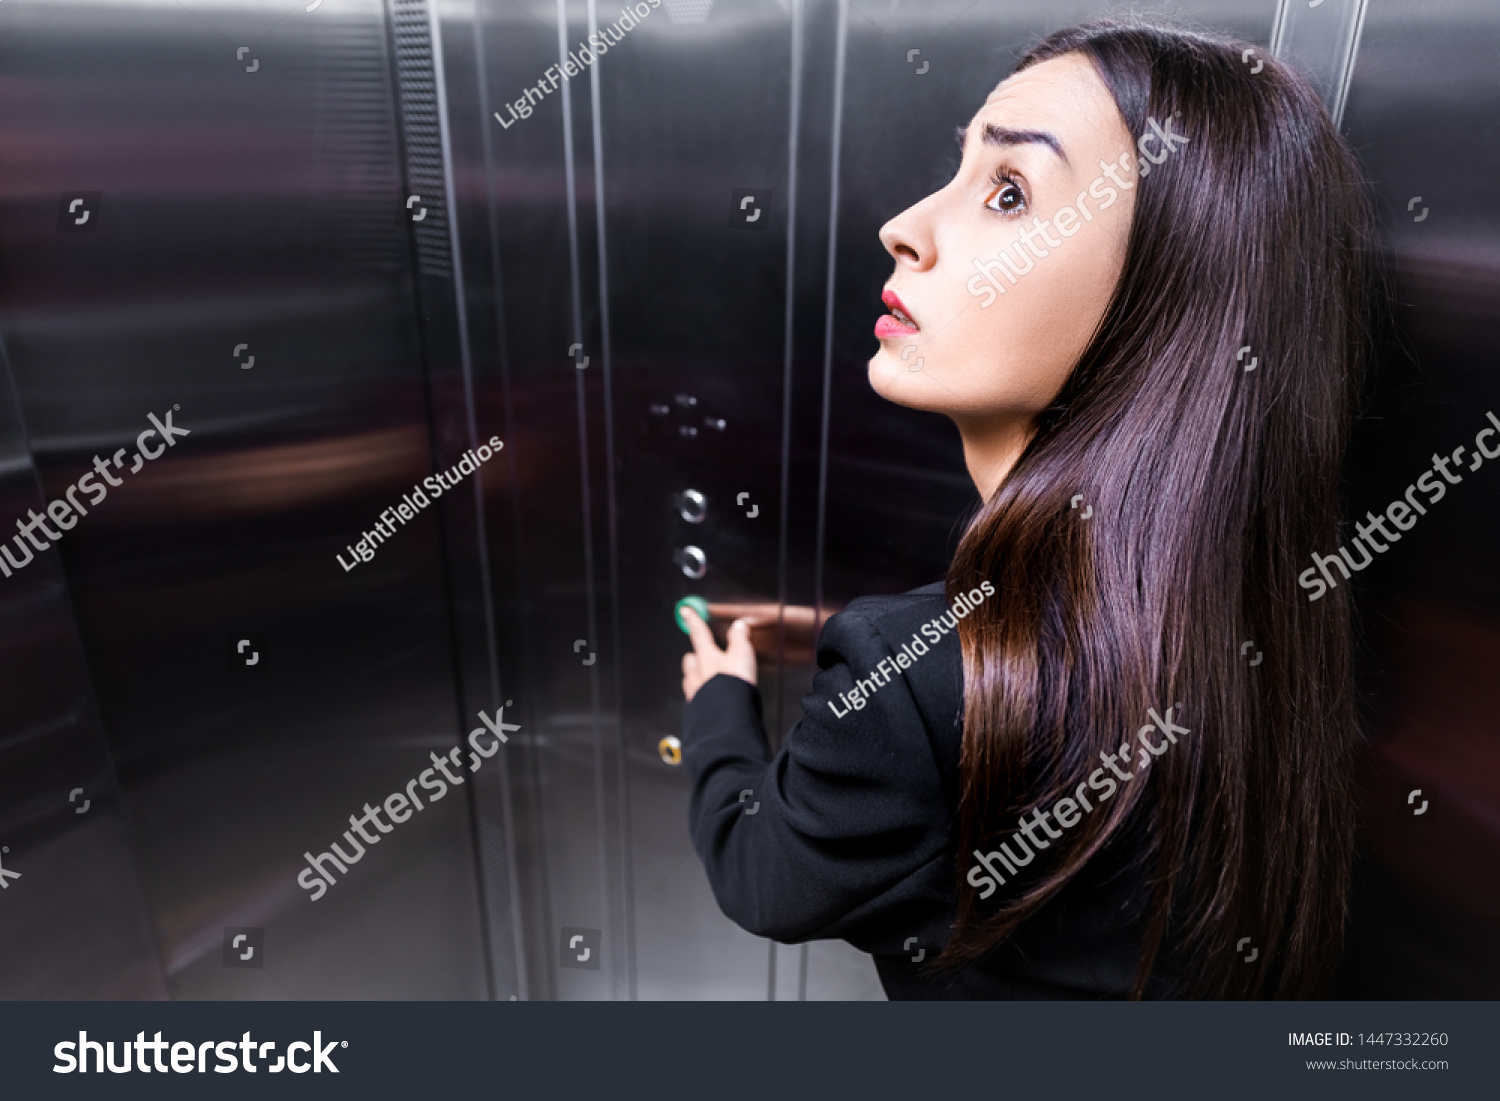 scared businesswoman, suffering from claustrophobia, looking up while pushing button in elevator #1447332260